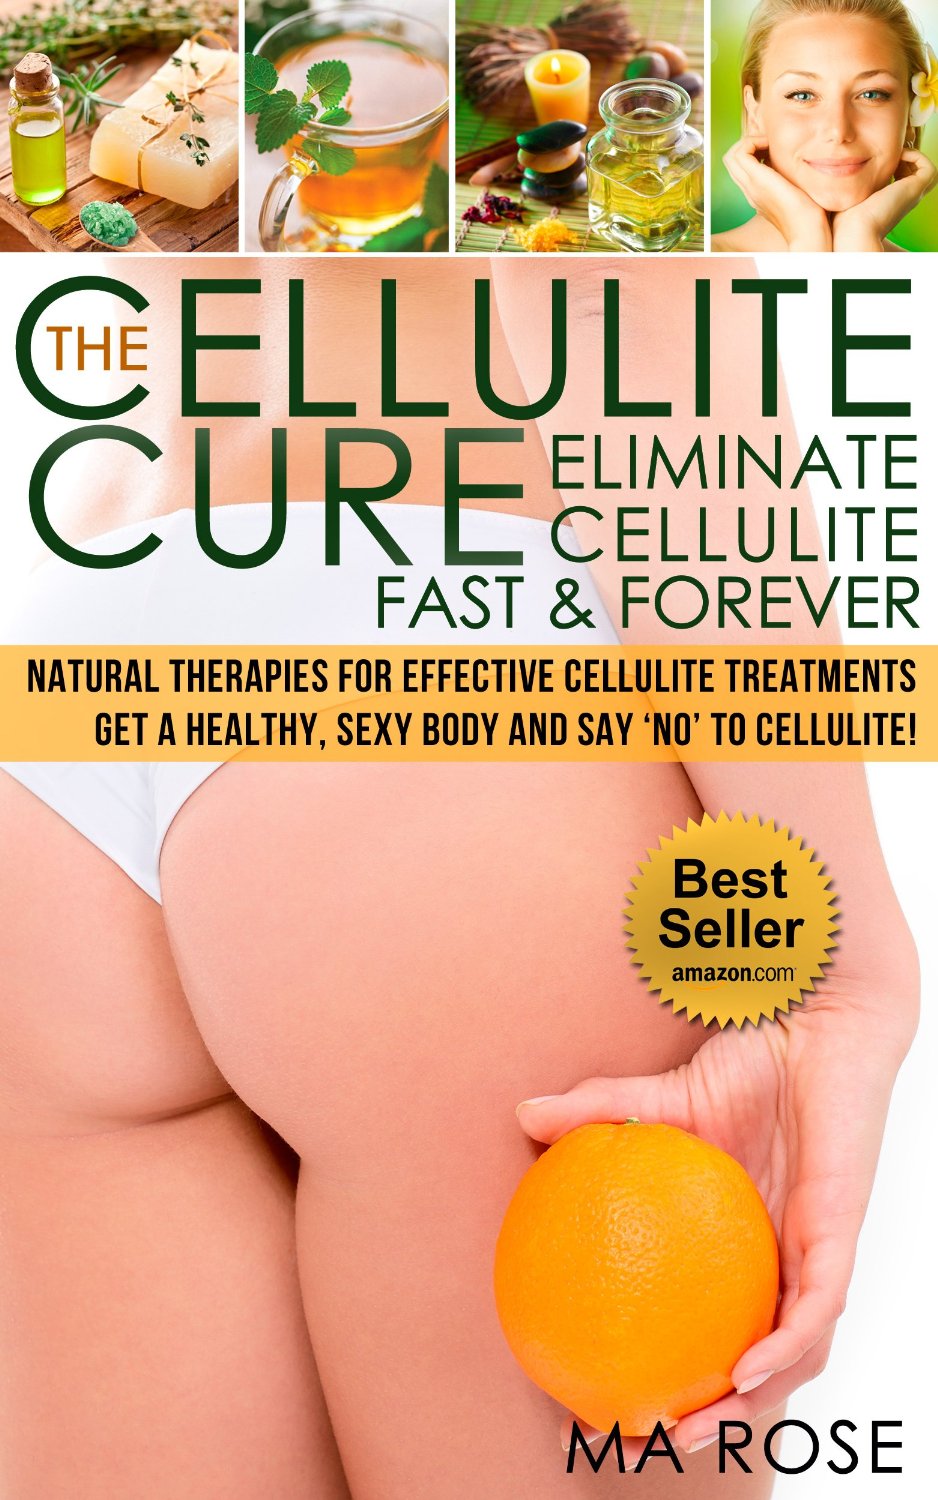 The Cellulite Cure by Marta Tuchowska